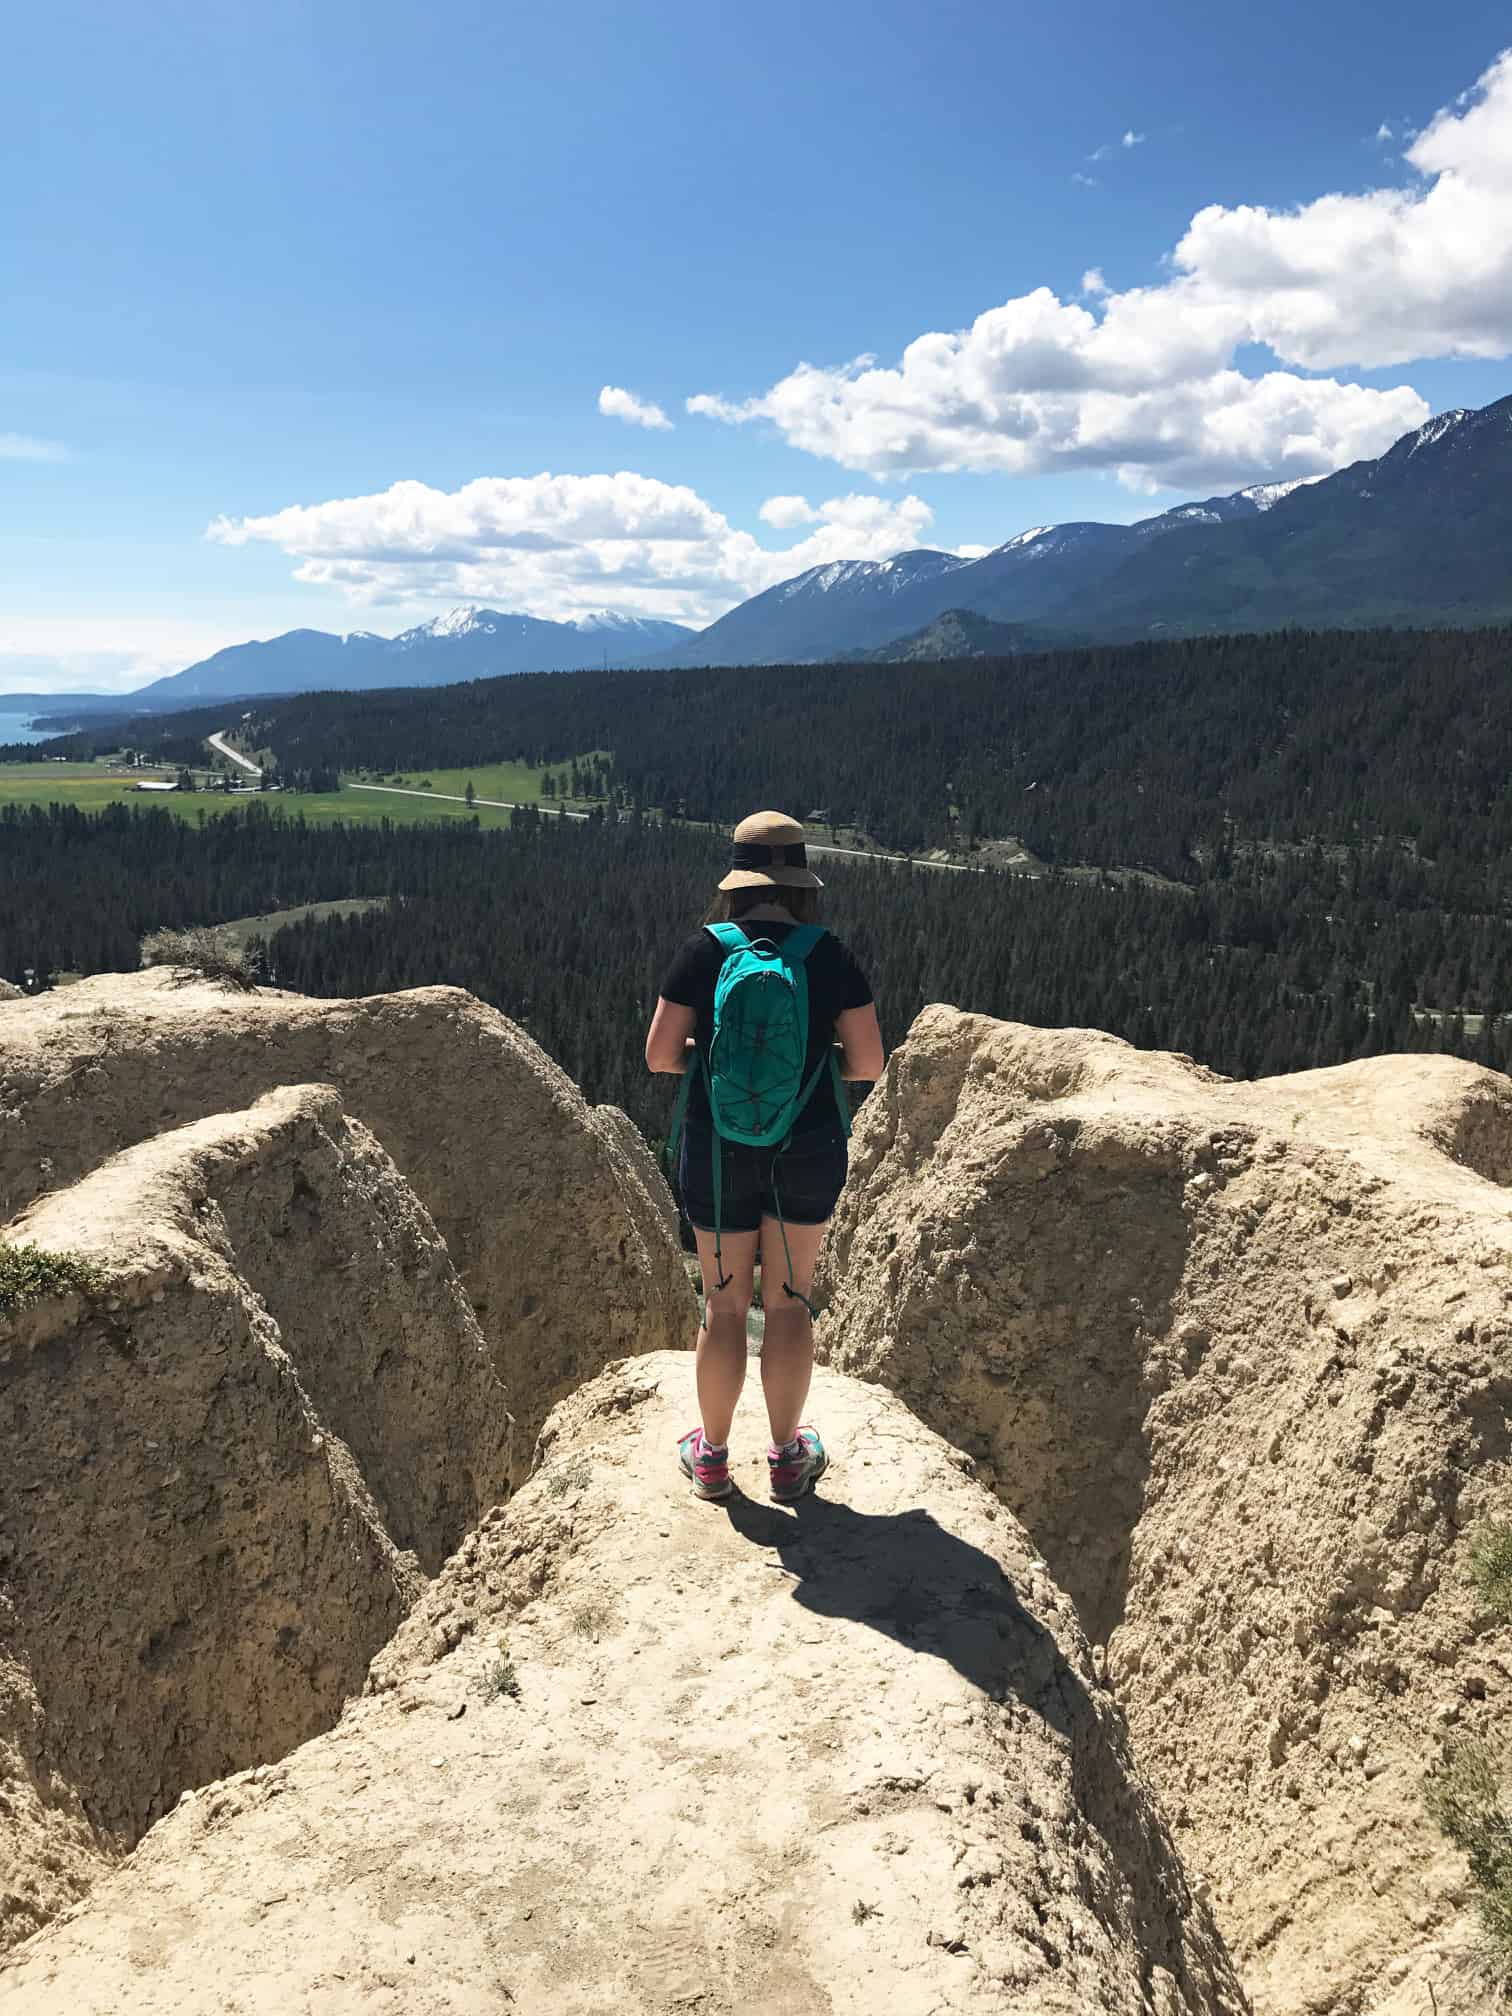 The Hoodoo Trail at Fairmont Hot Springs in BC